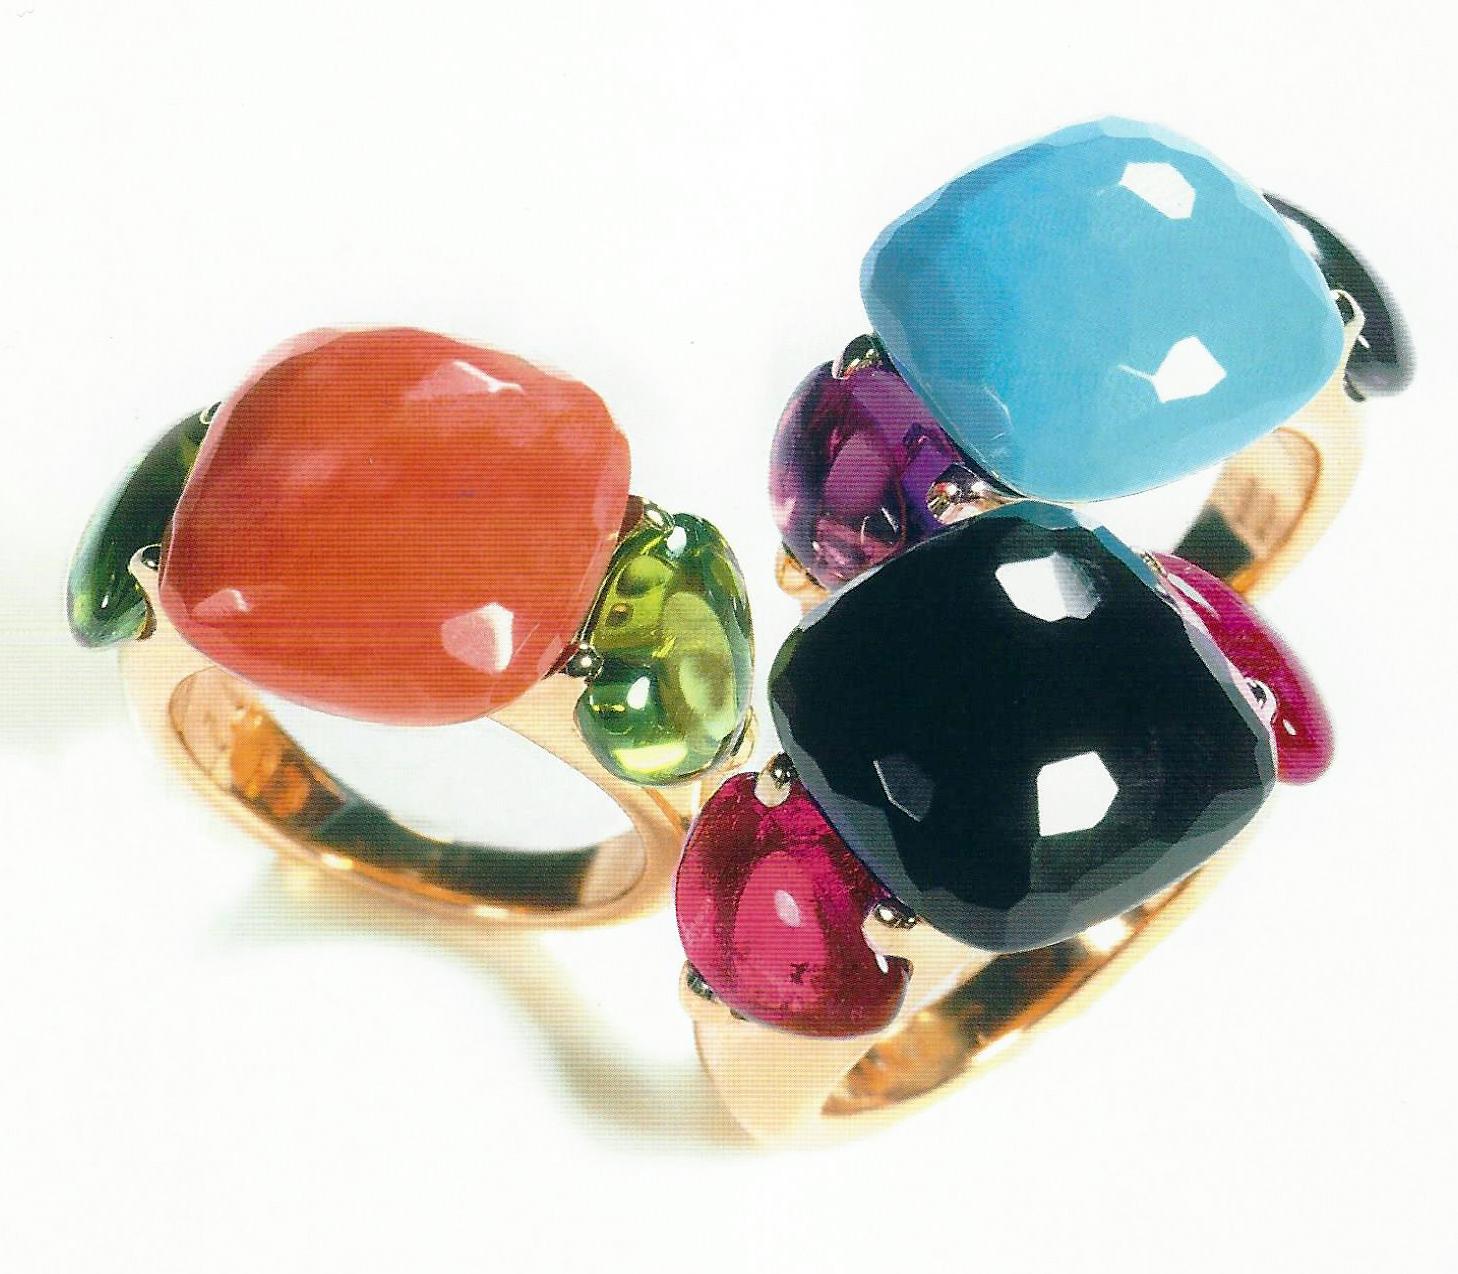 Women's Pomellato Capri Ring in 18 Karat Rose Gold with Onyx and Red Tourmaline